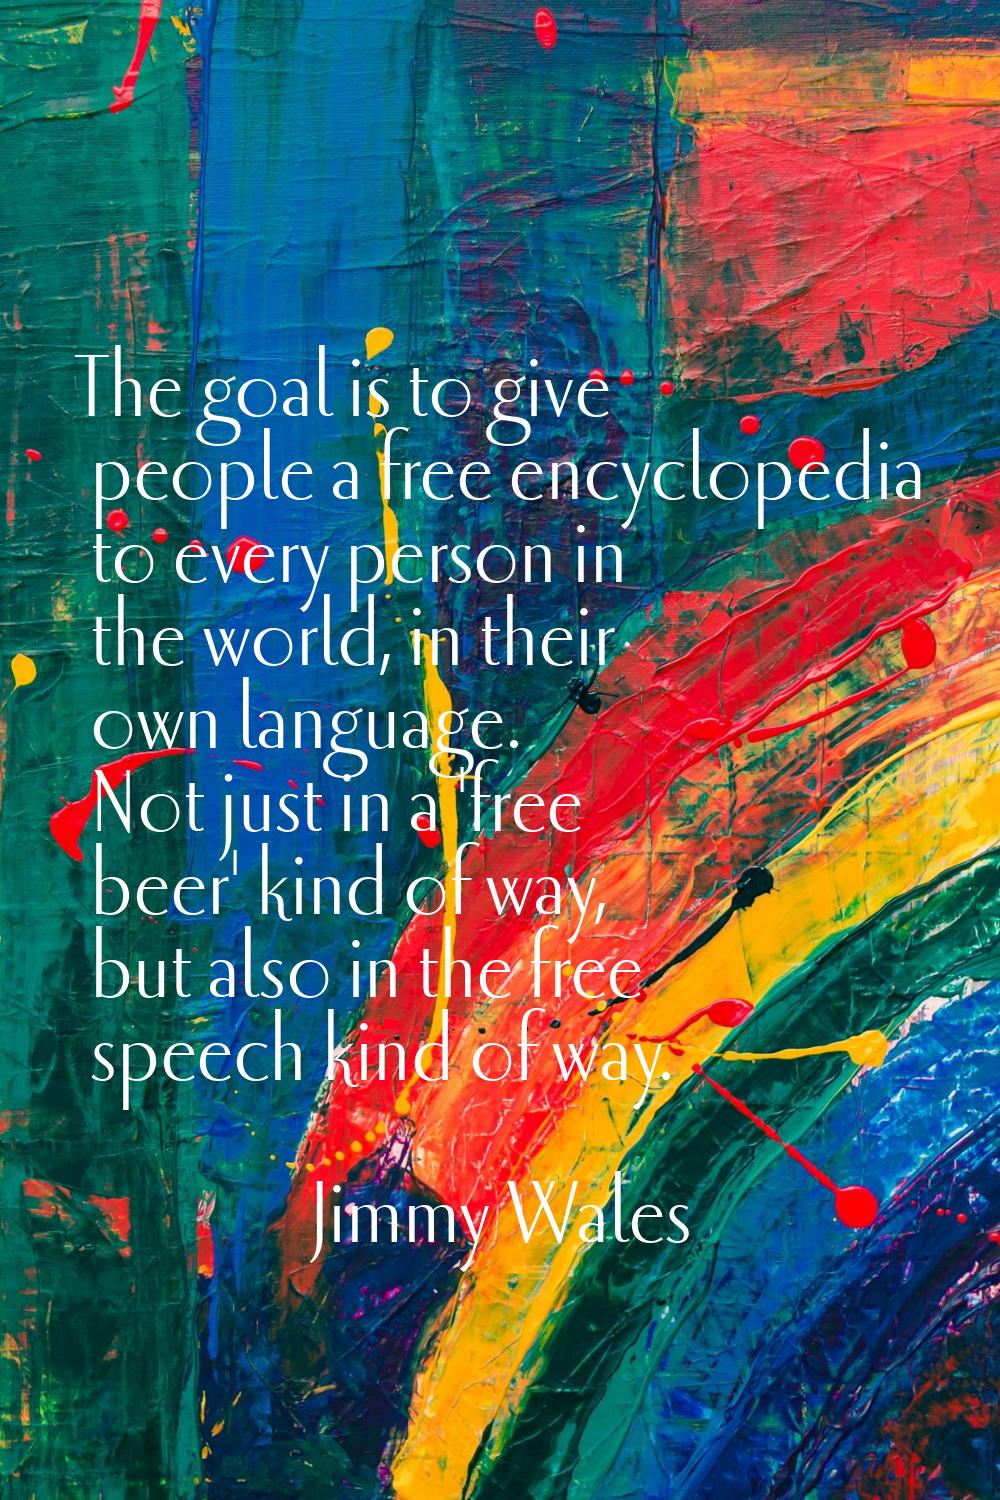 The goal is to give people a free encyclopedia to every person in the world, in their own language.